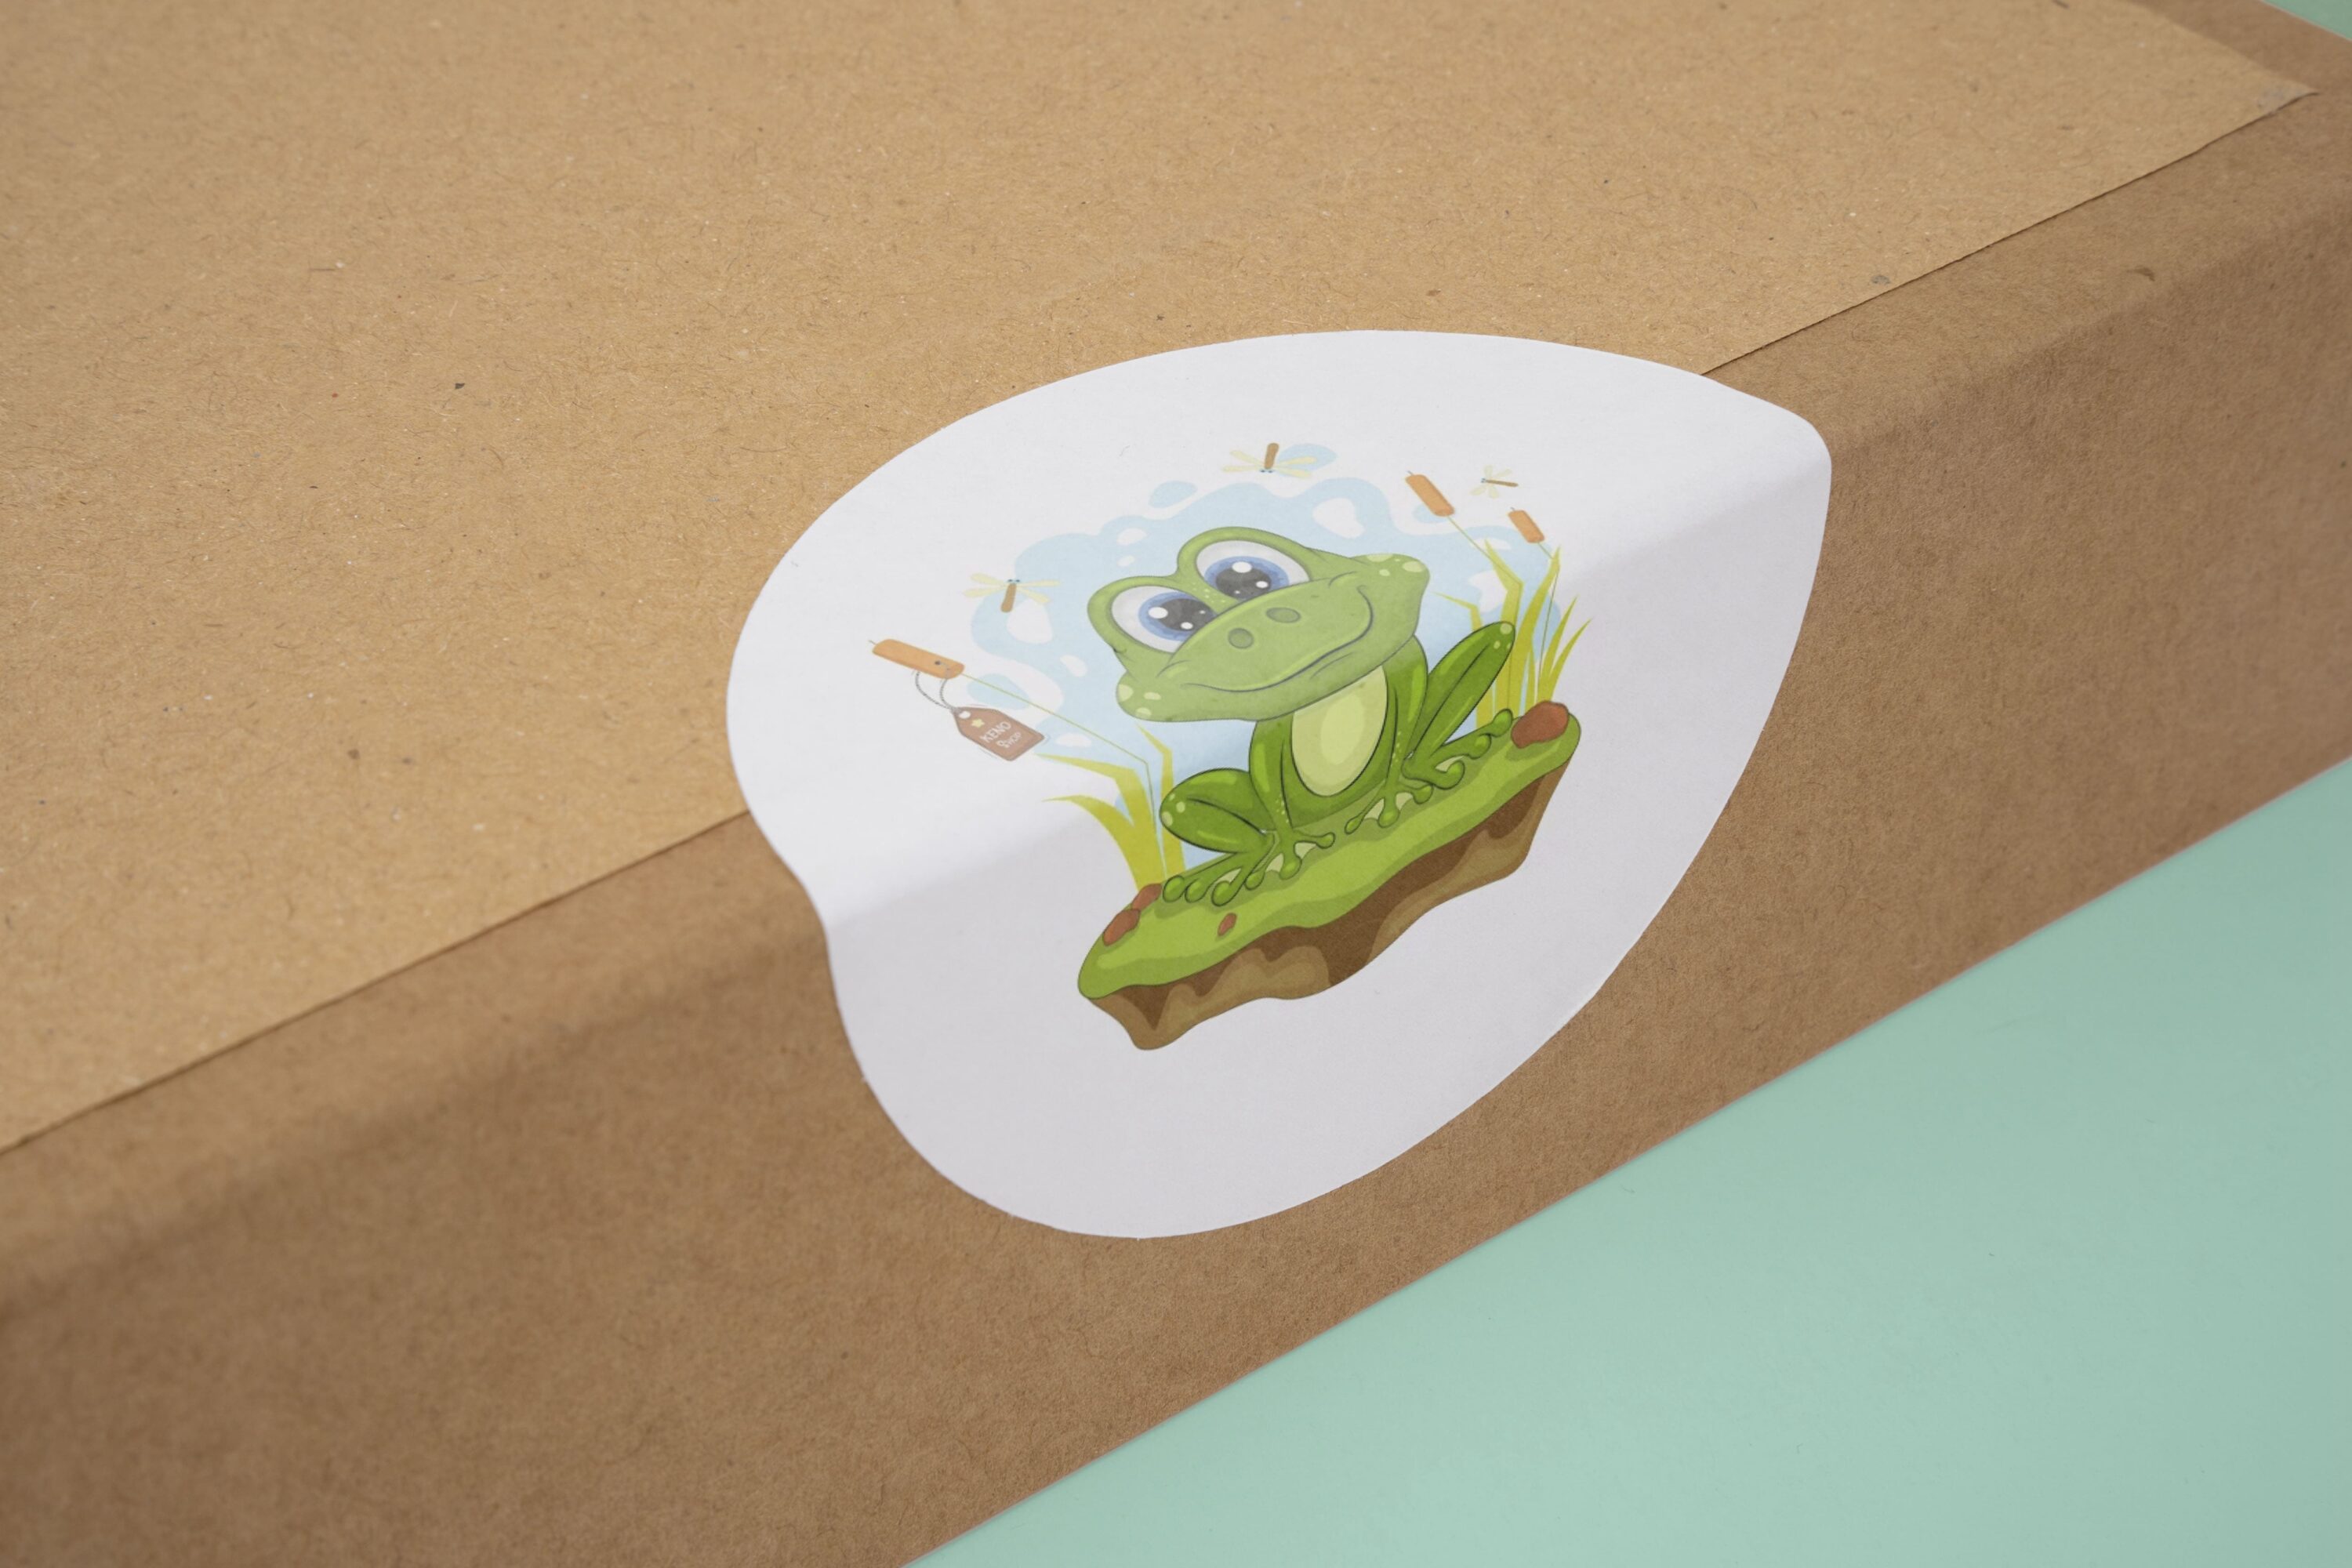 Cardboard box with a sticker of a frog on it.